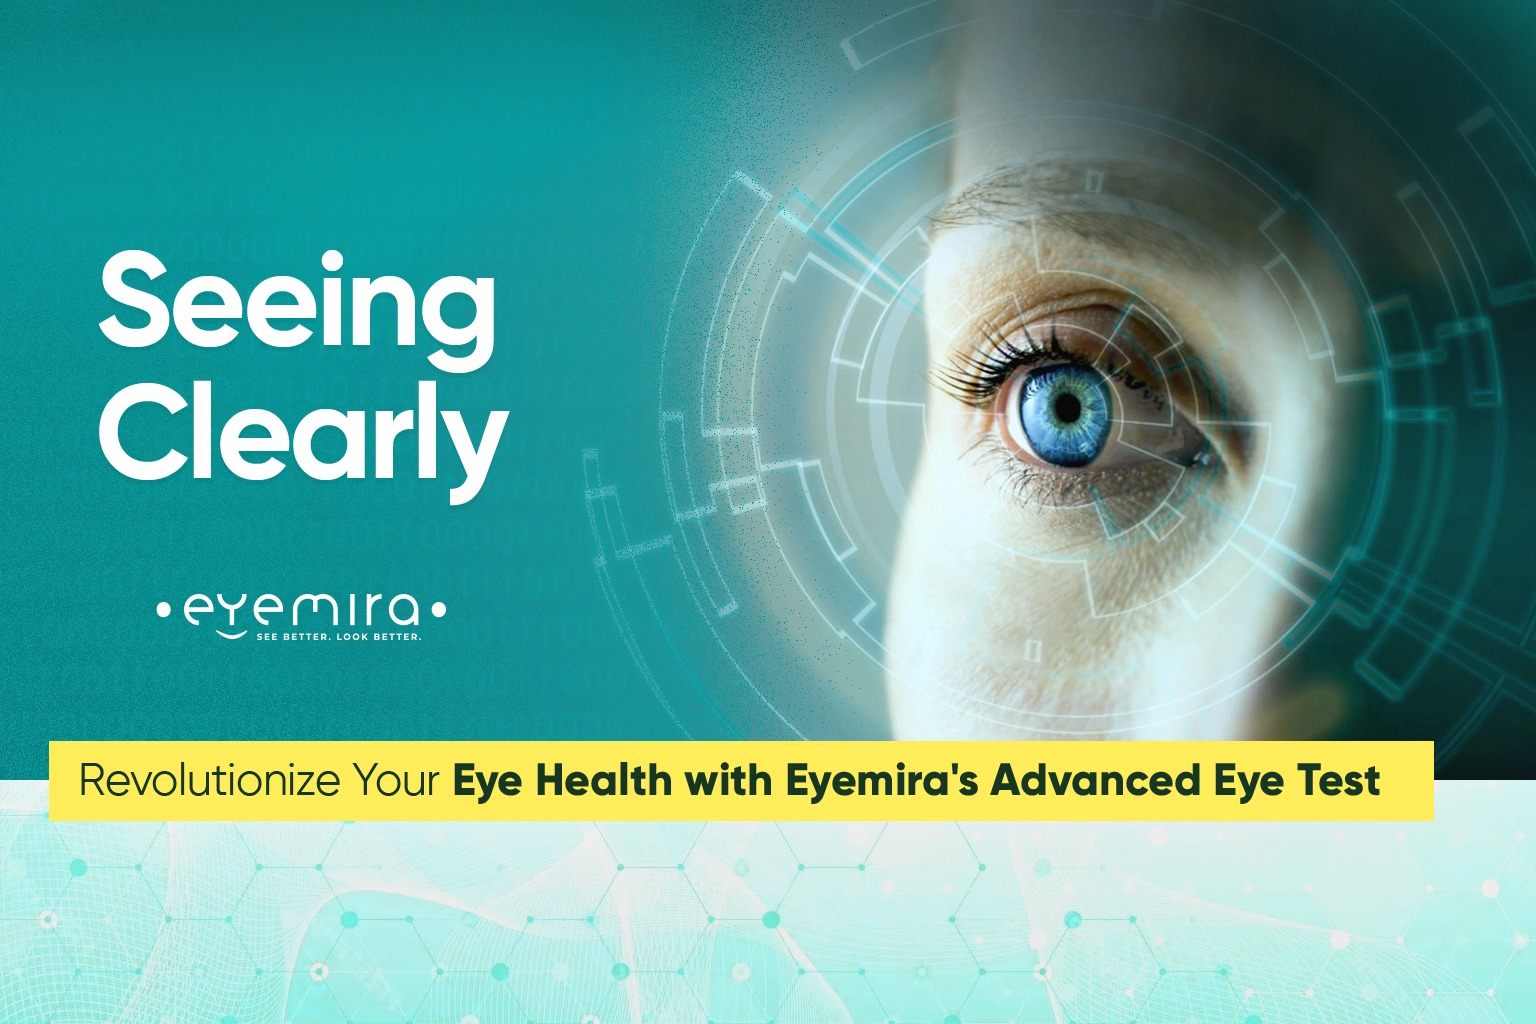 Seeing Clearly: Revolutionary Eyecare with Eyemira’s Advanced Eye Test